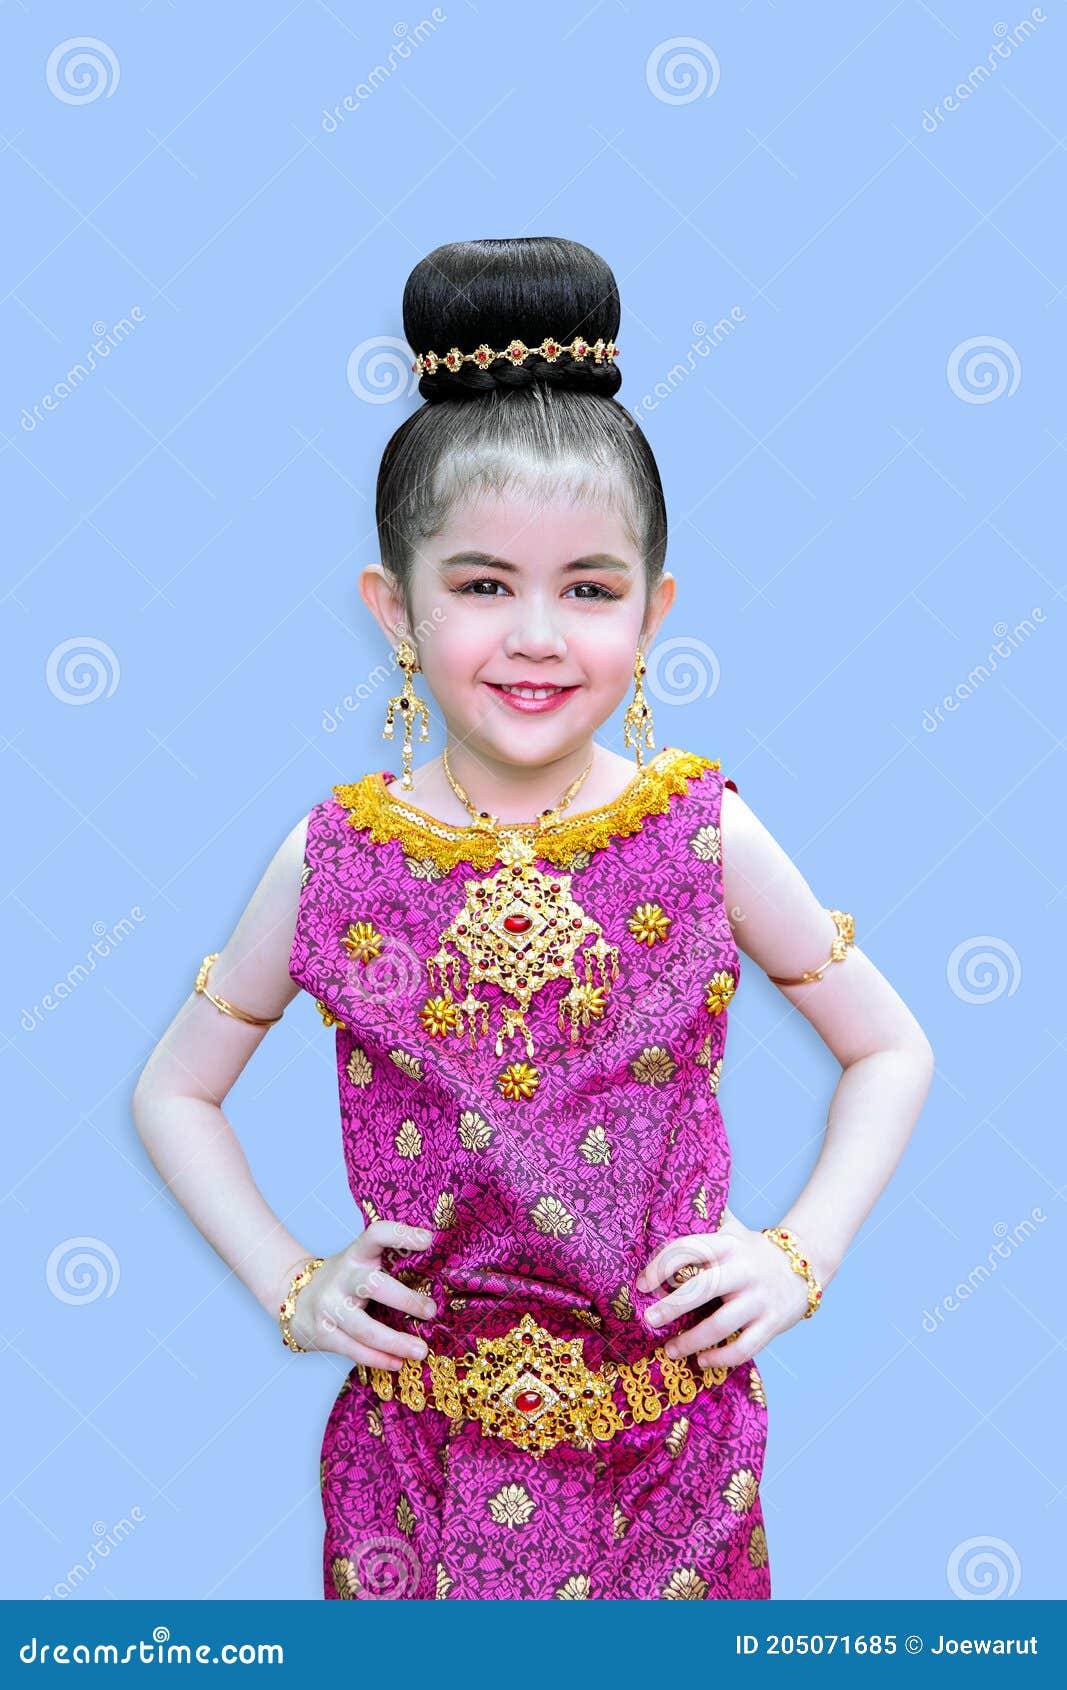 Thai Traditional Costume Beauty Stock Image - Image of happy, fashion:  205071685